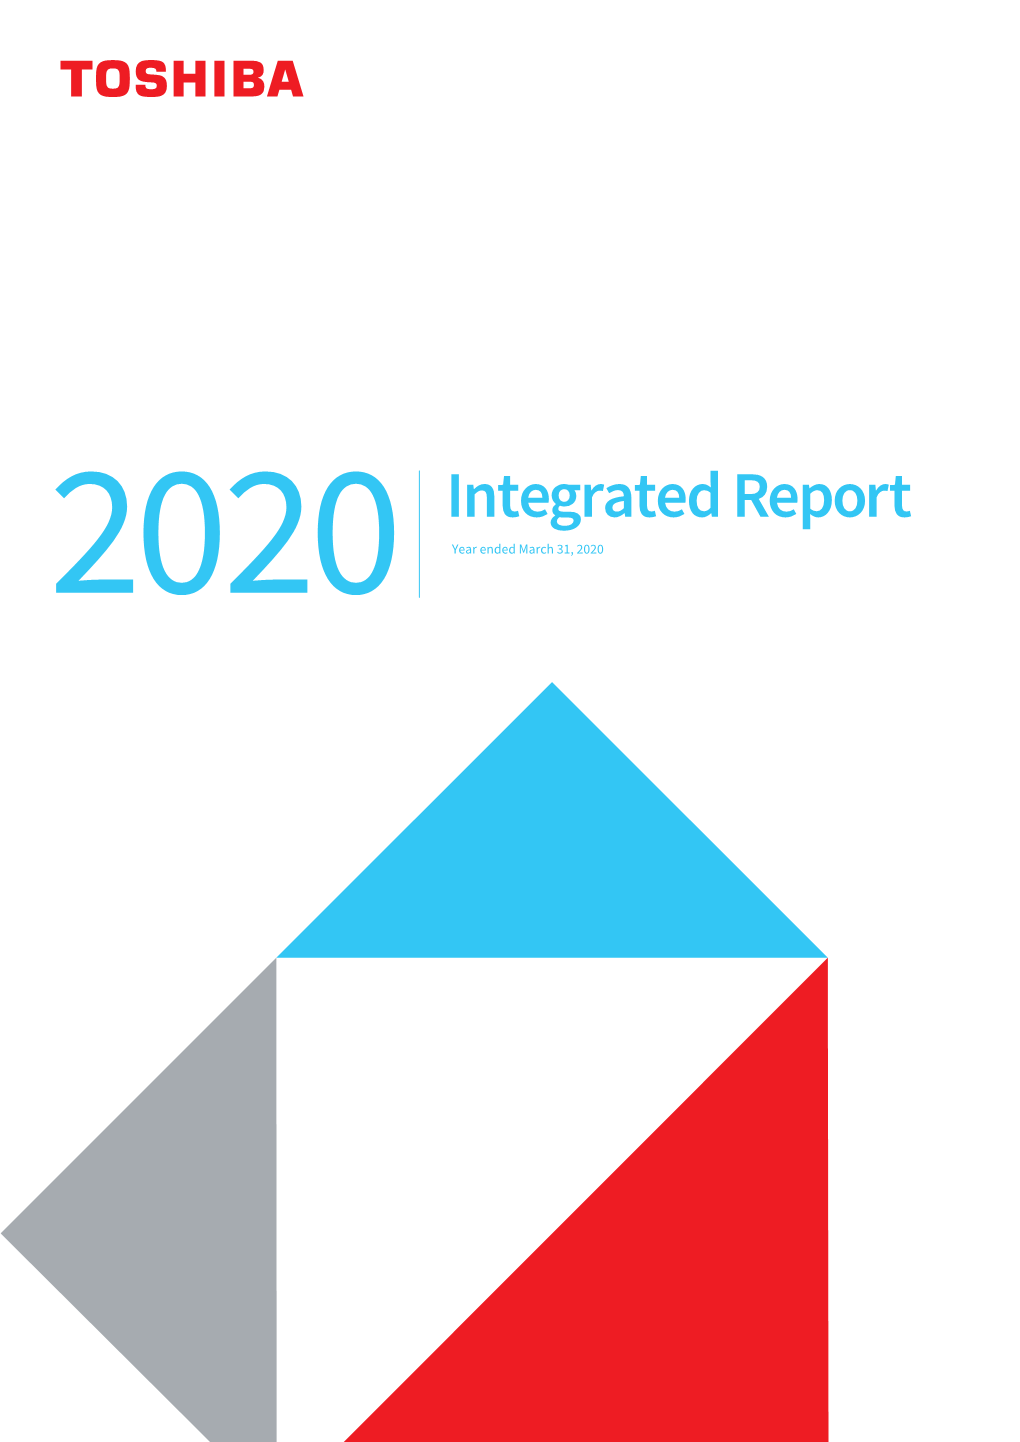 2020 Integrated Report